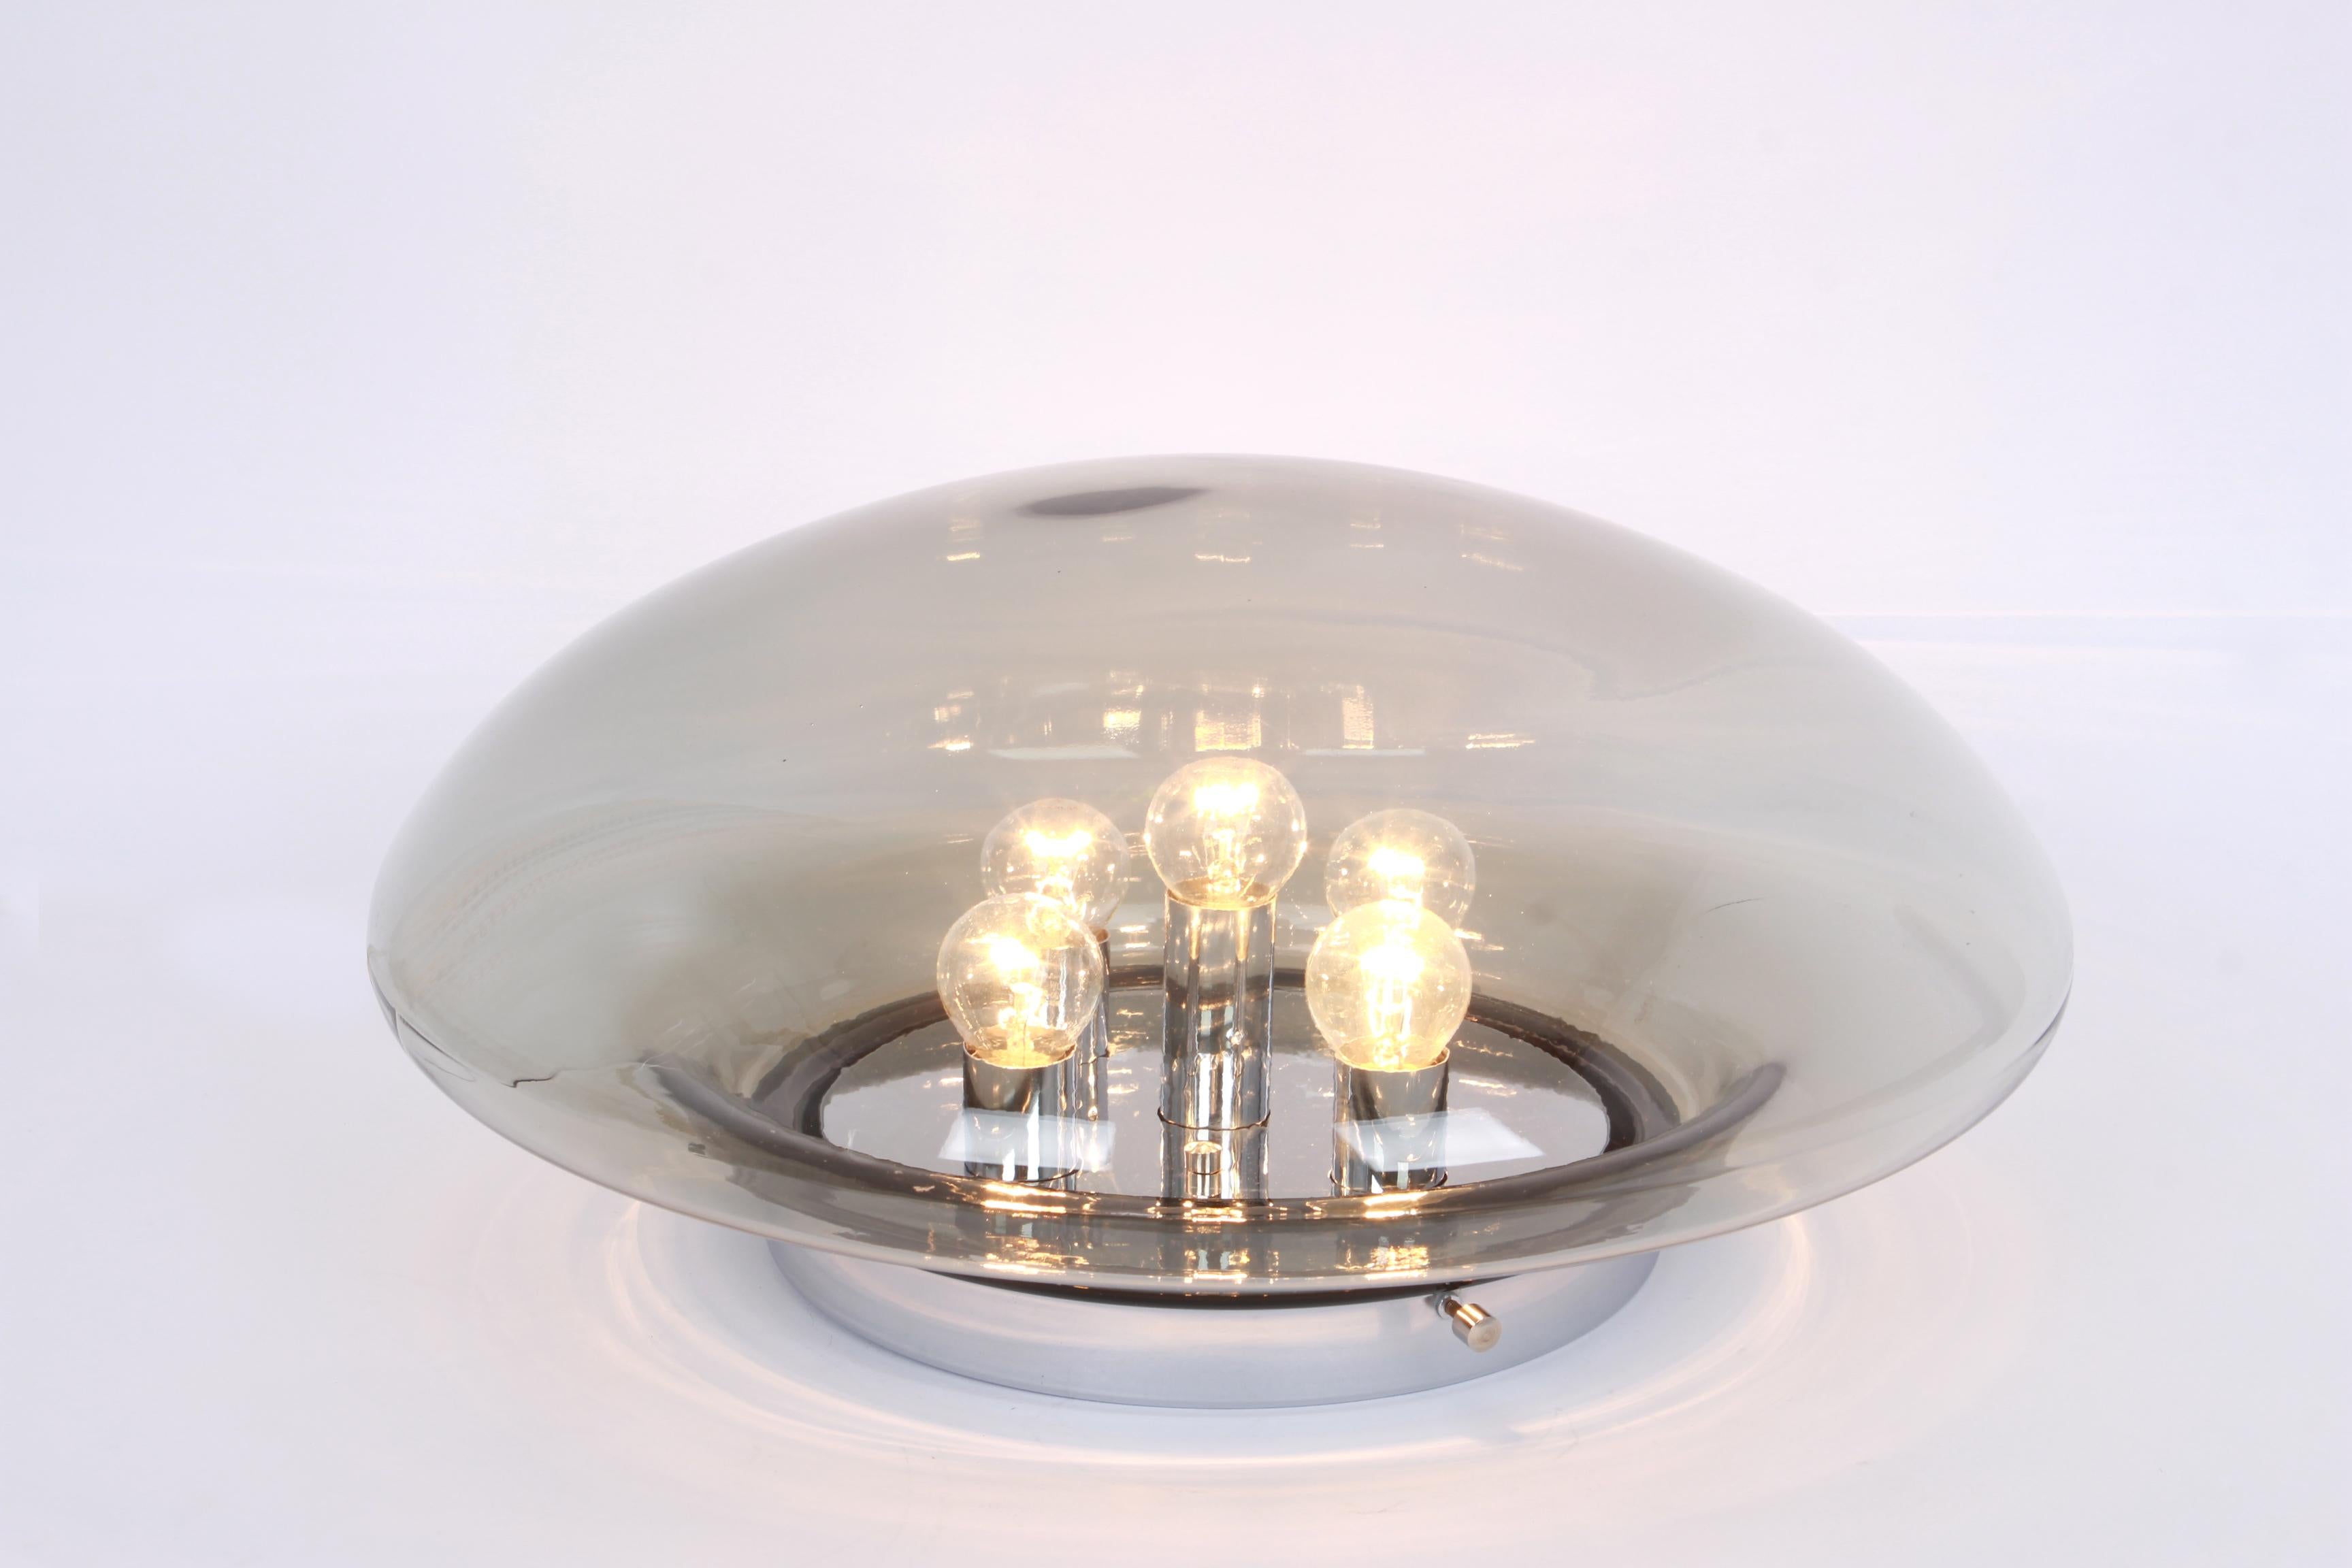 Large Gray/Green Glass flush mount manufactured by Limburg Glashütte Germany, circa 1960-1969. Wonderful spaceship form and a stunning light effect.

High quality and in very good condition. Cleaned, well-wired and ready to use. 

The fixture